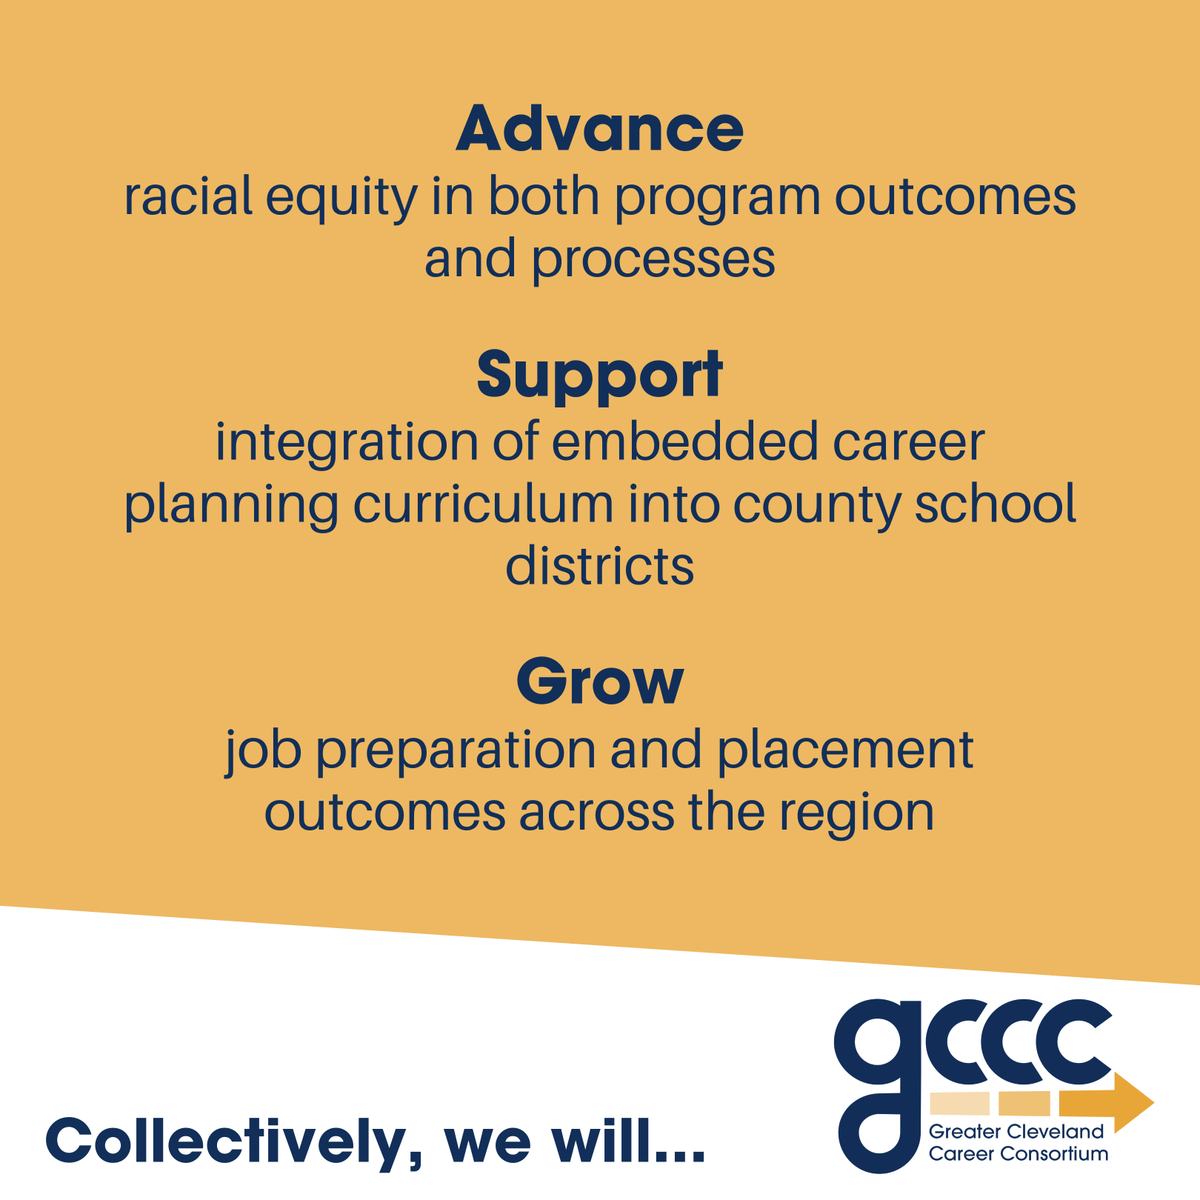 Collectively, we will... #GCCC #advance #support #grow